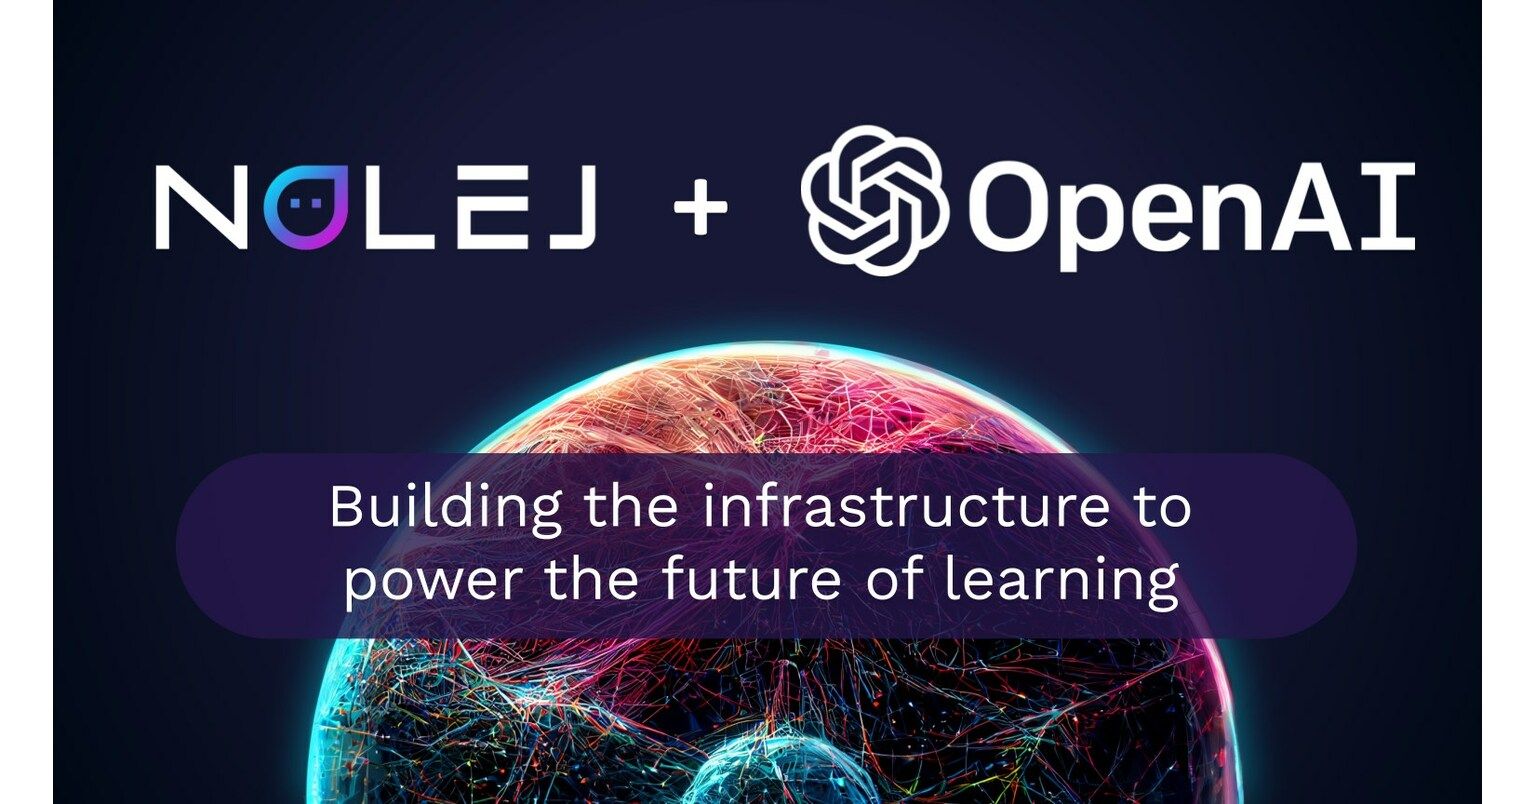 OpenAI and Nolej's Partnership for Innovation in EdTech